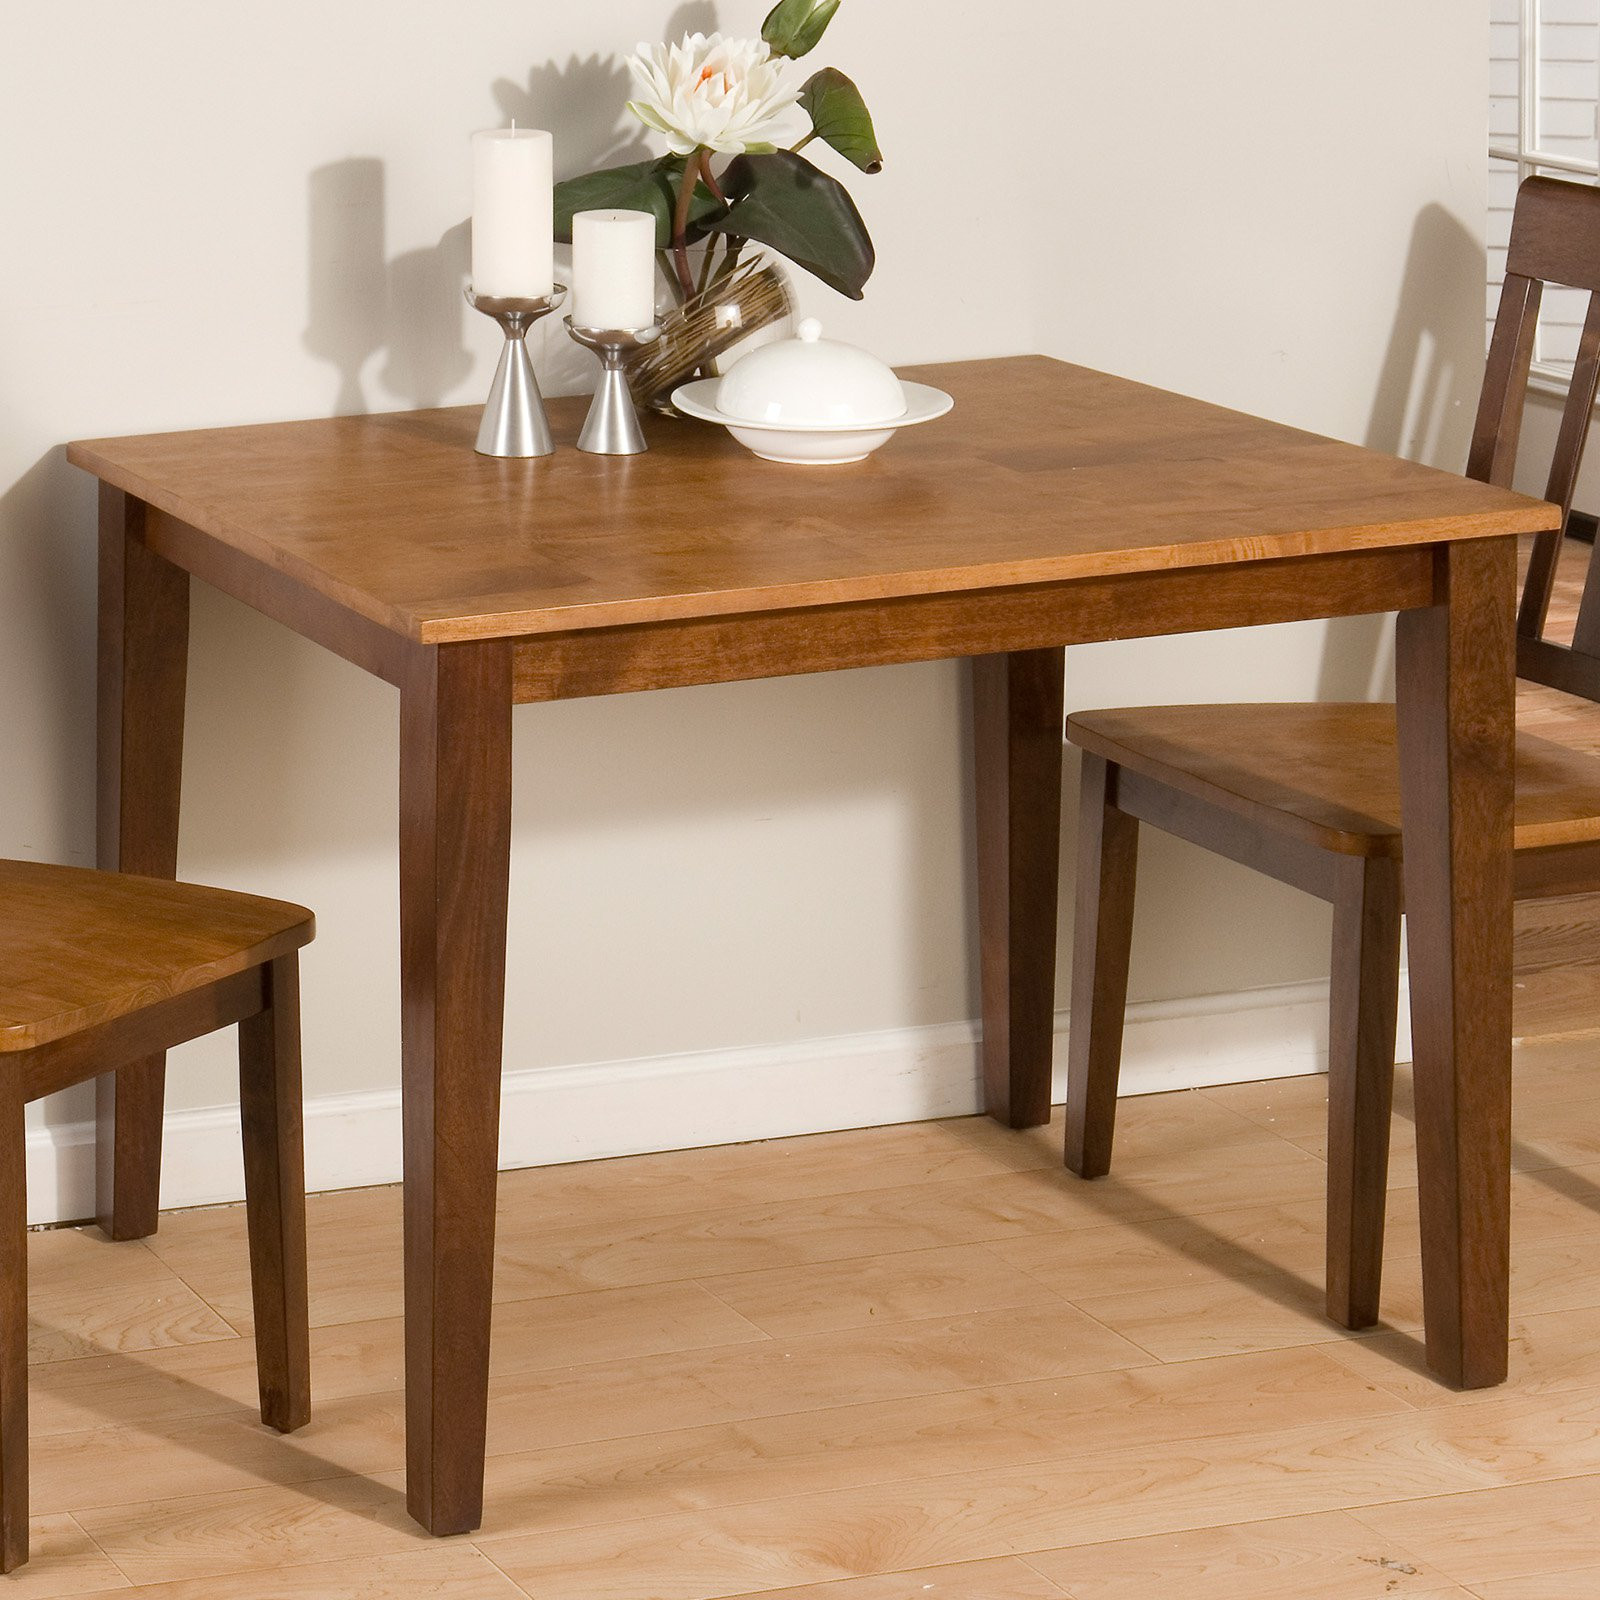 Table For Small Kitchen
 Small Rectangular Kitchen Table – HomesFeed